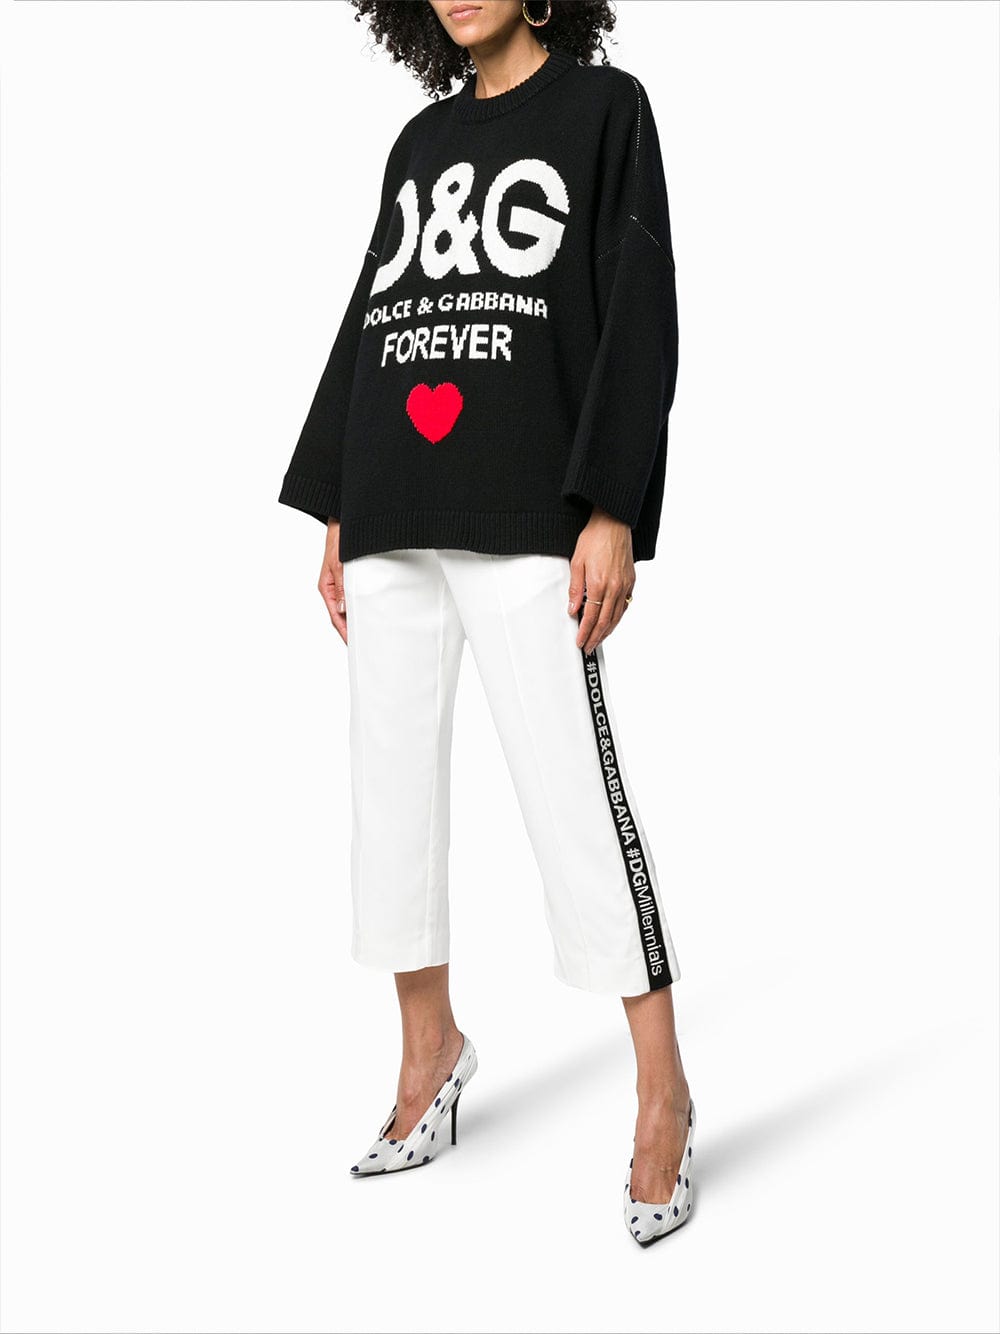 galop amme pille Dolce & Gabbana Cashmere D&G Forever Sweater